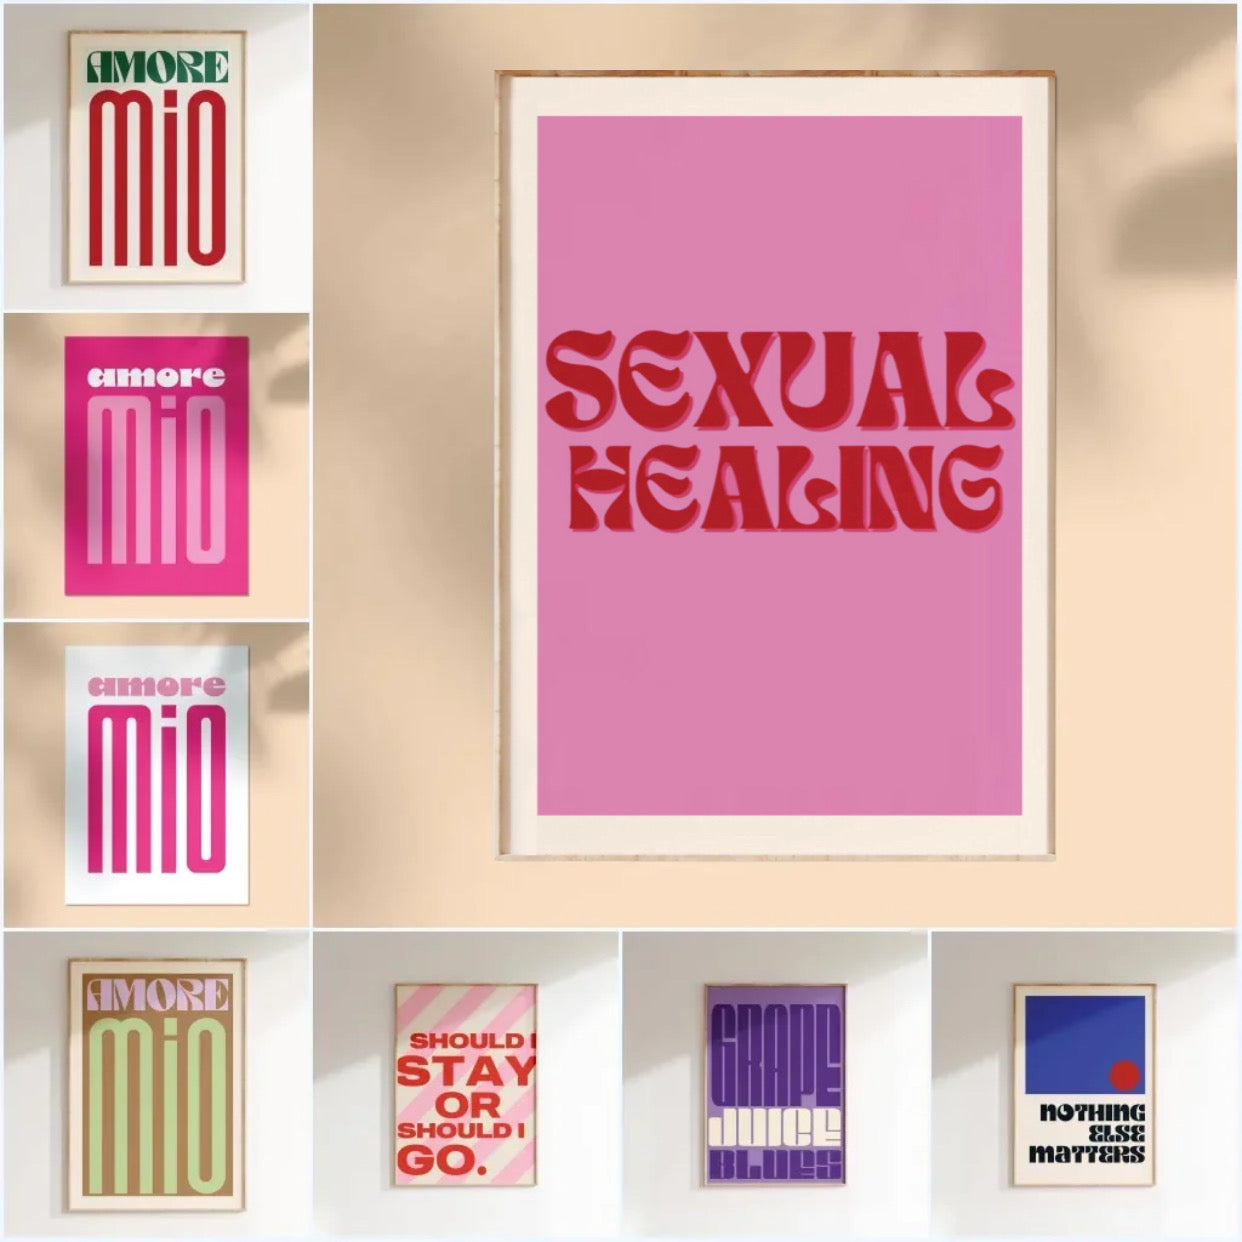 " sexual healing " poster